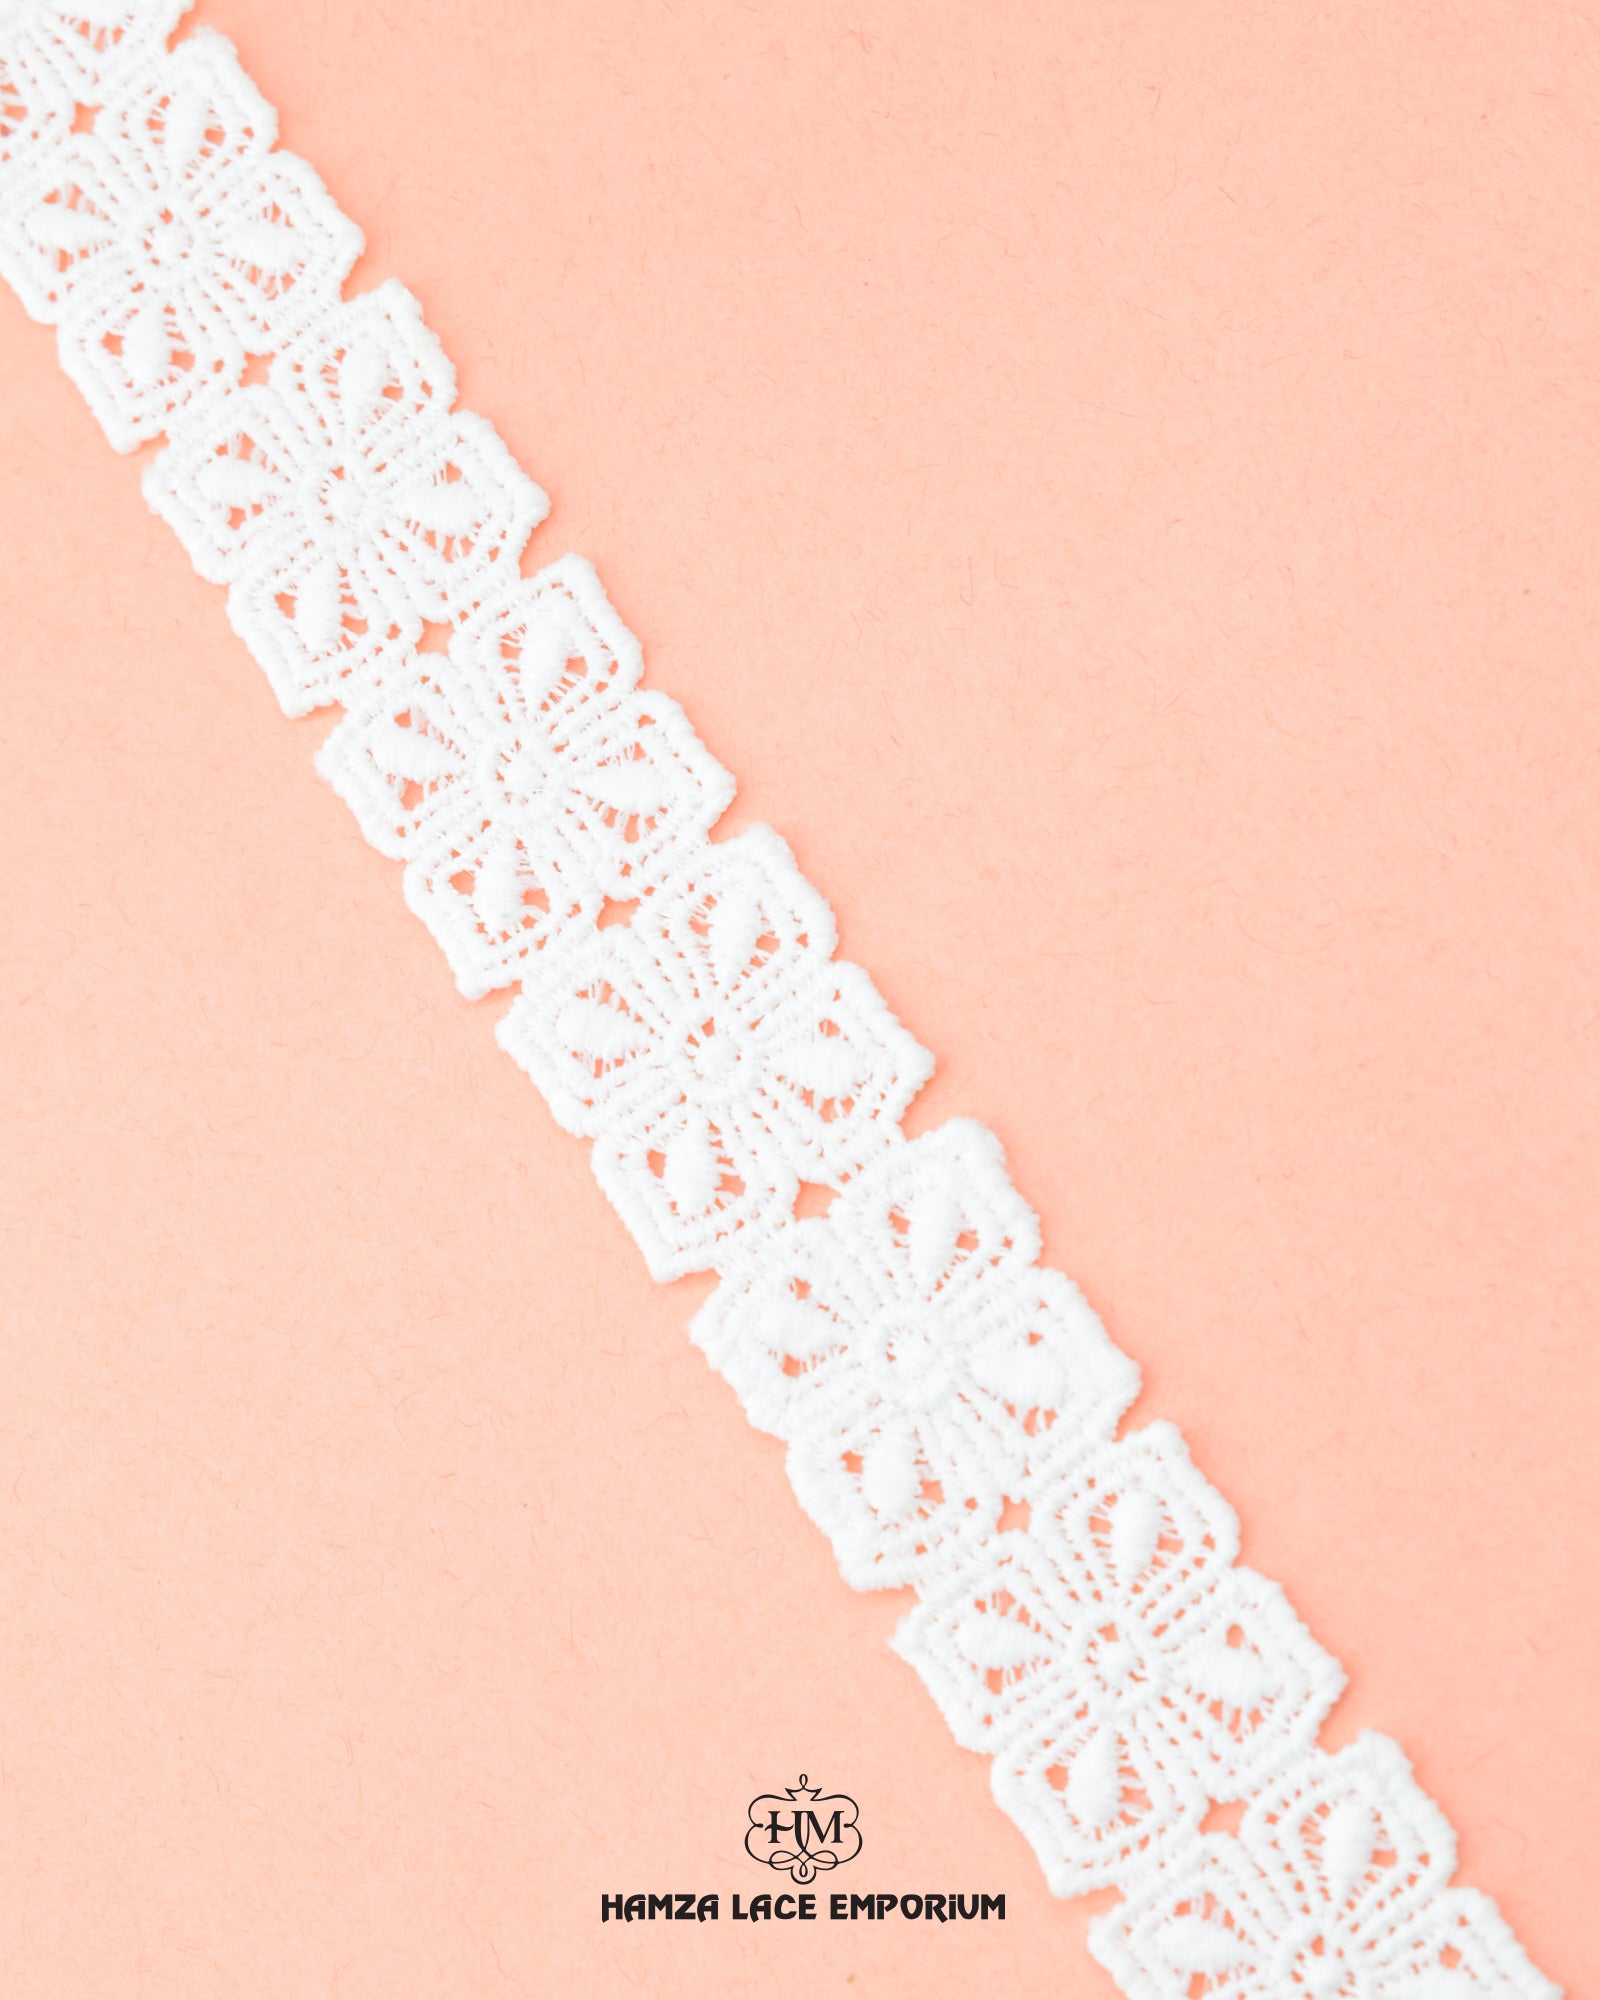 'Center Filling Lace 21558' with the brand name 'Hamza Lace' at the bottom